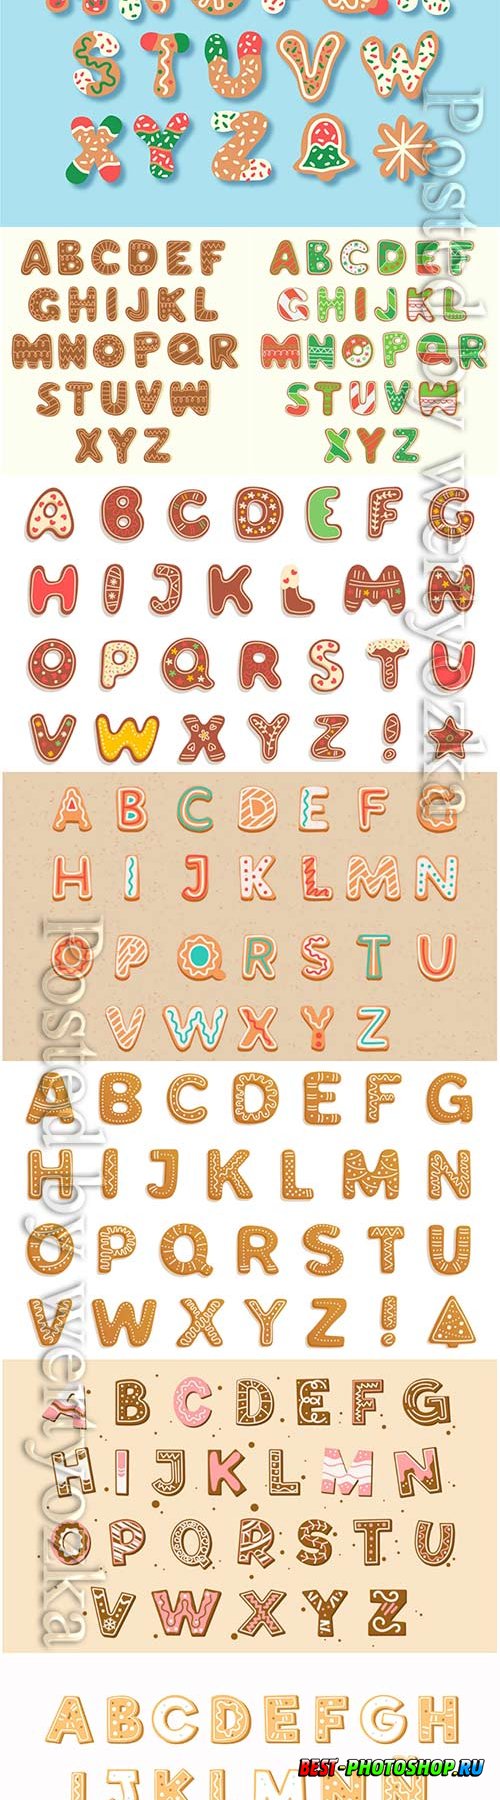 Gingerbread christmas alphabetical vector letters